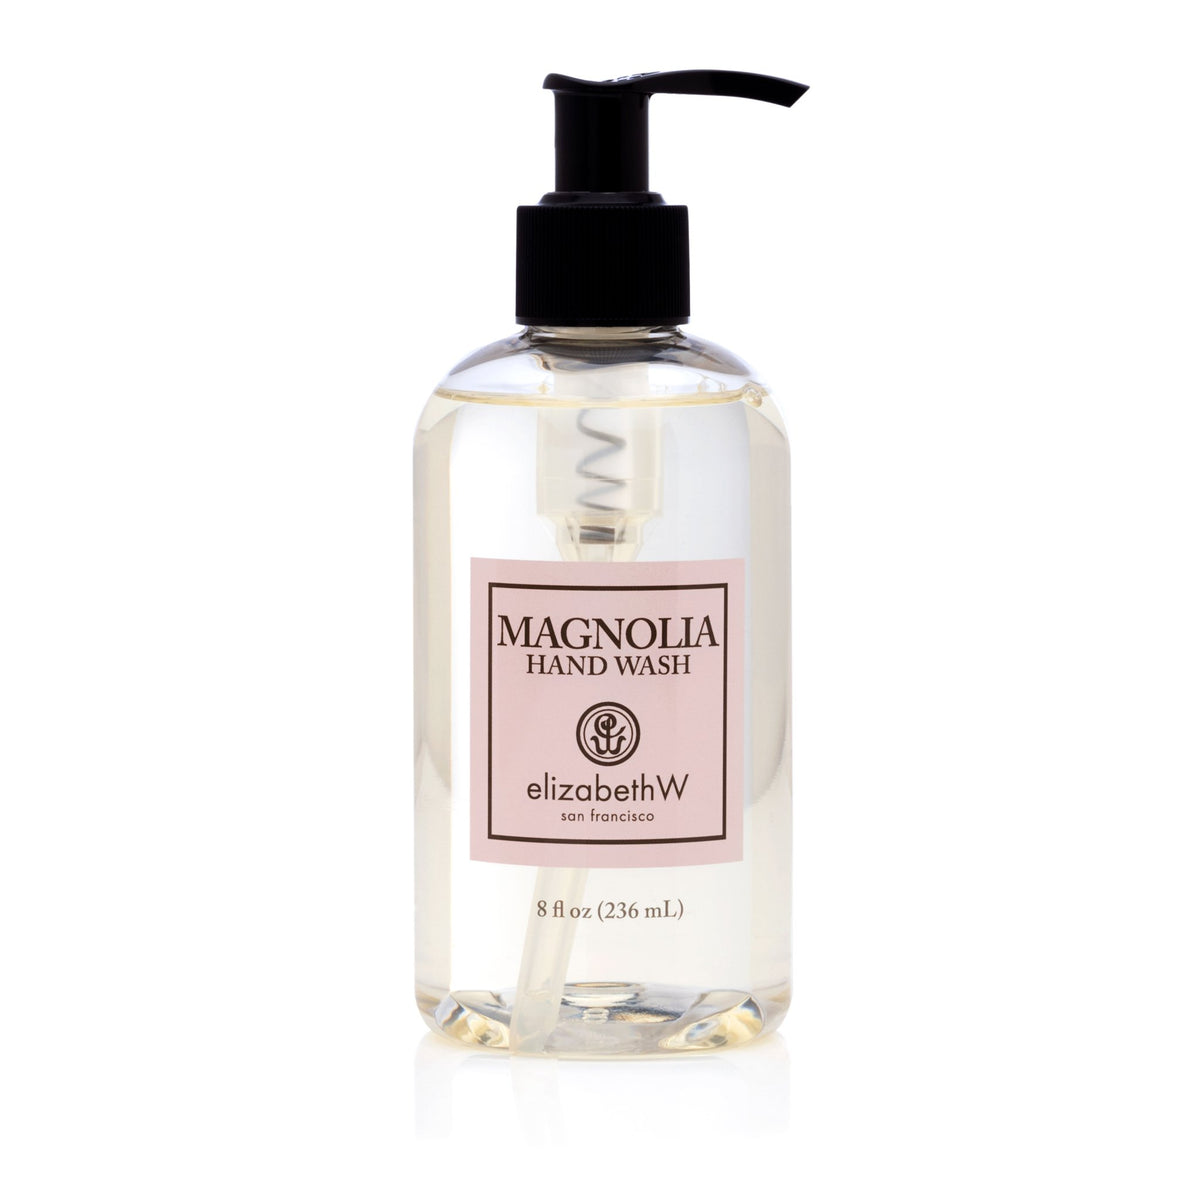 A clear plastic bottle of magnolia petals hand wash labeled "elizabeth W Signature Magnolia Hand Wash," with a black dispenser, isolated on a white background.